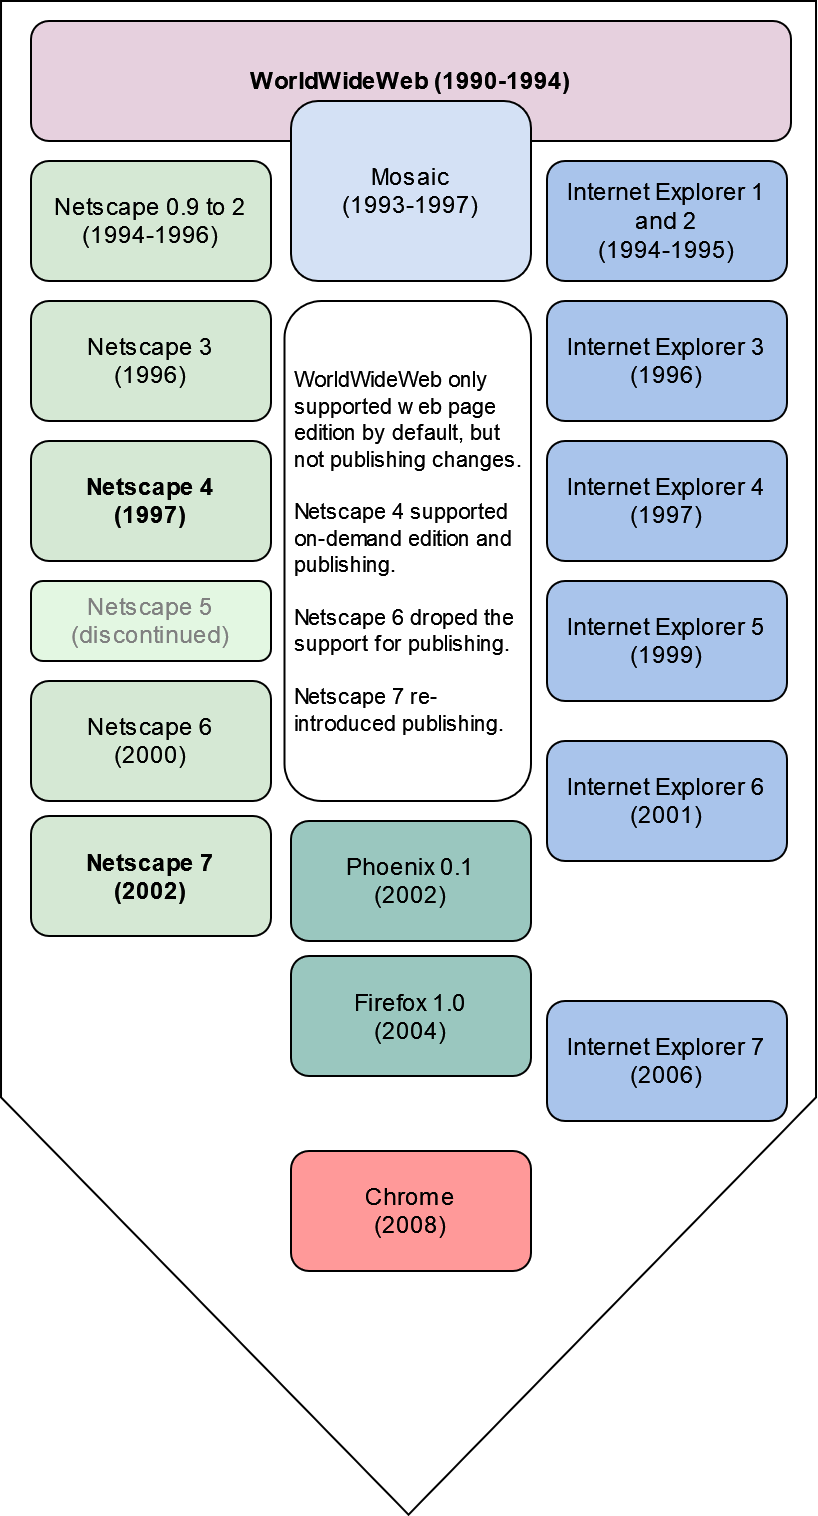 Overview of all this history of browsers